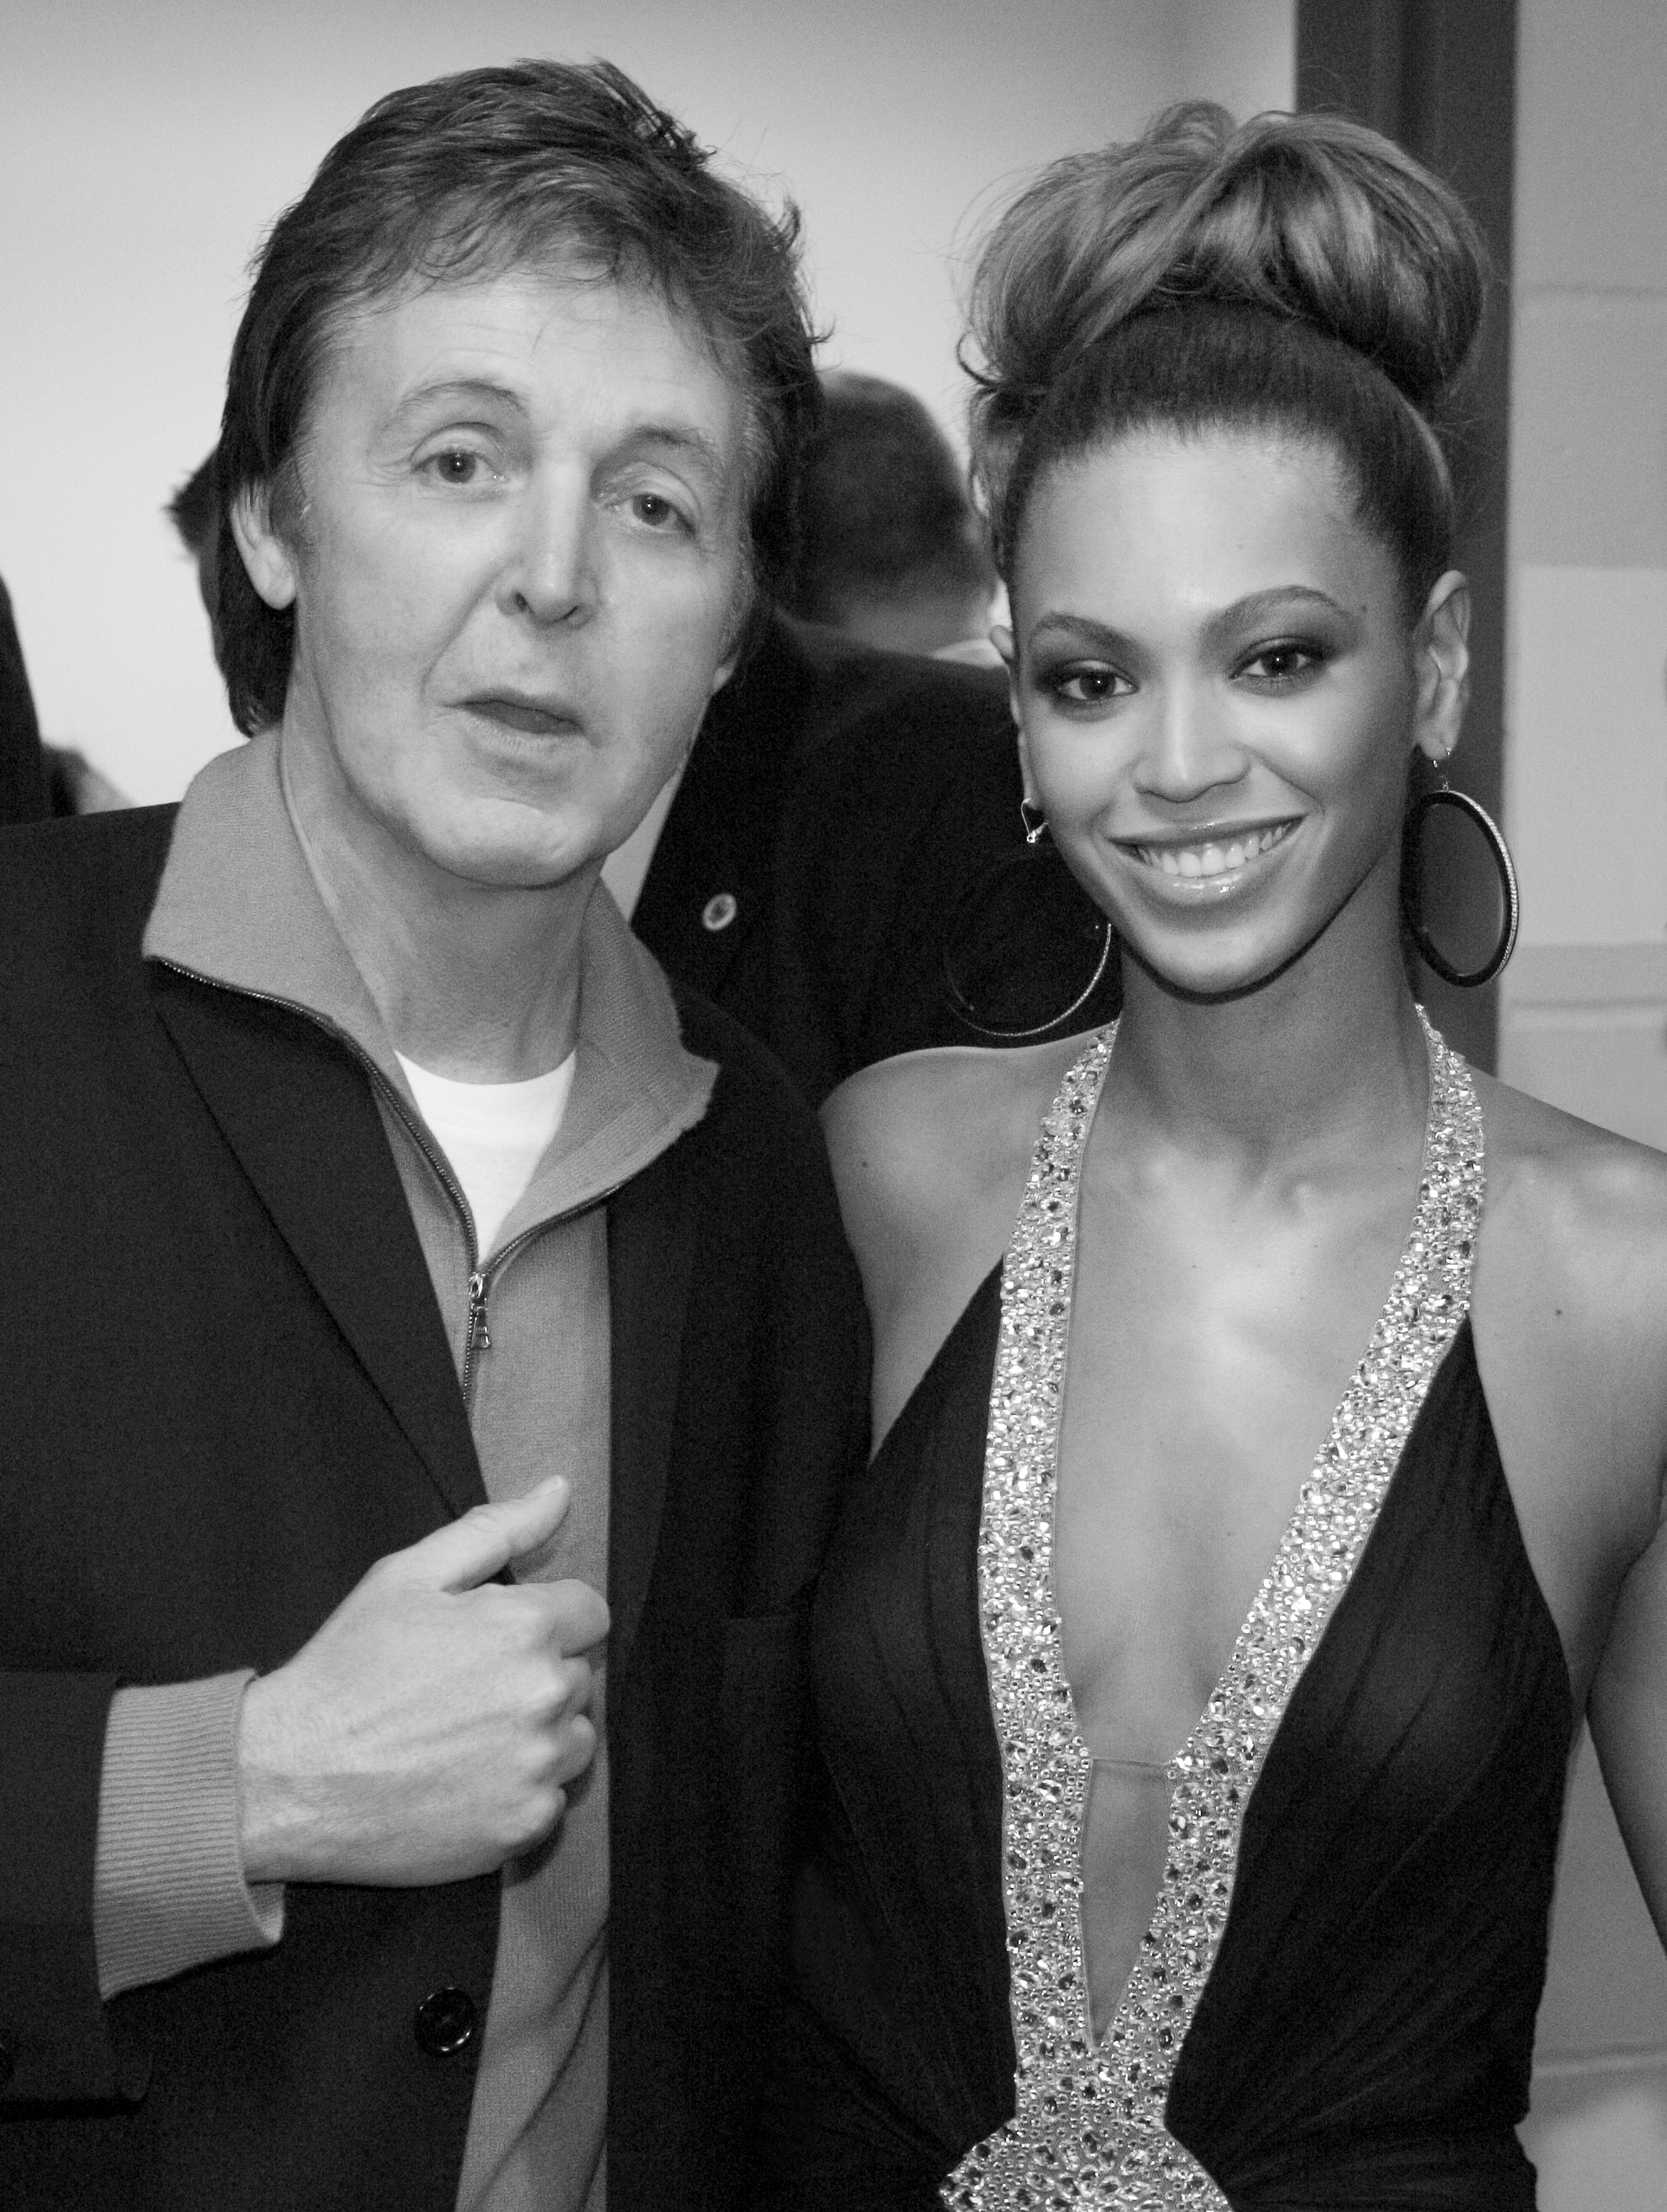 Black and white photo Paul McCartney and Beyoncè Knowles Carter at the Grammys